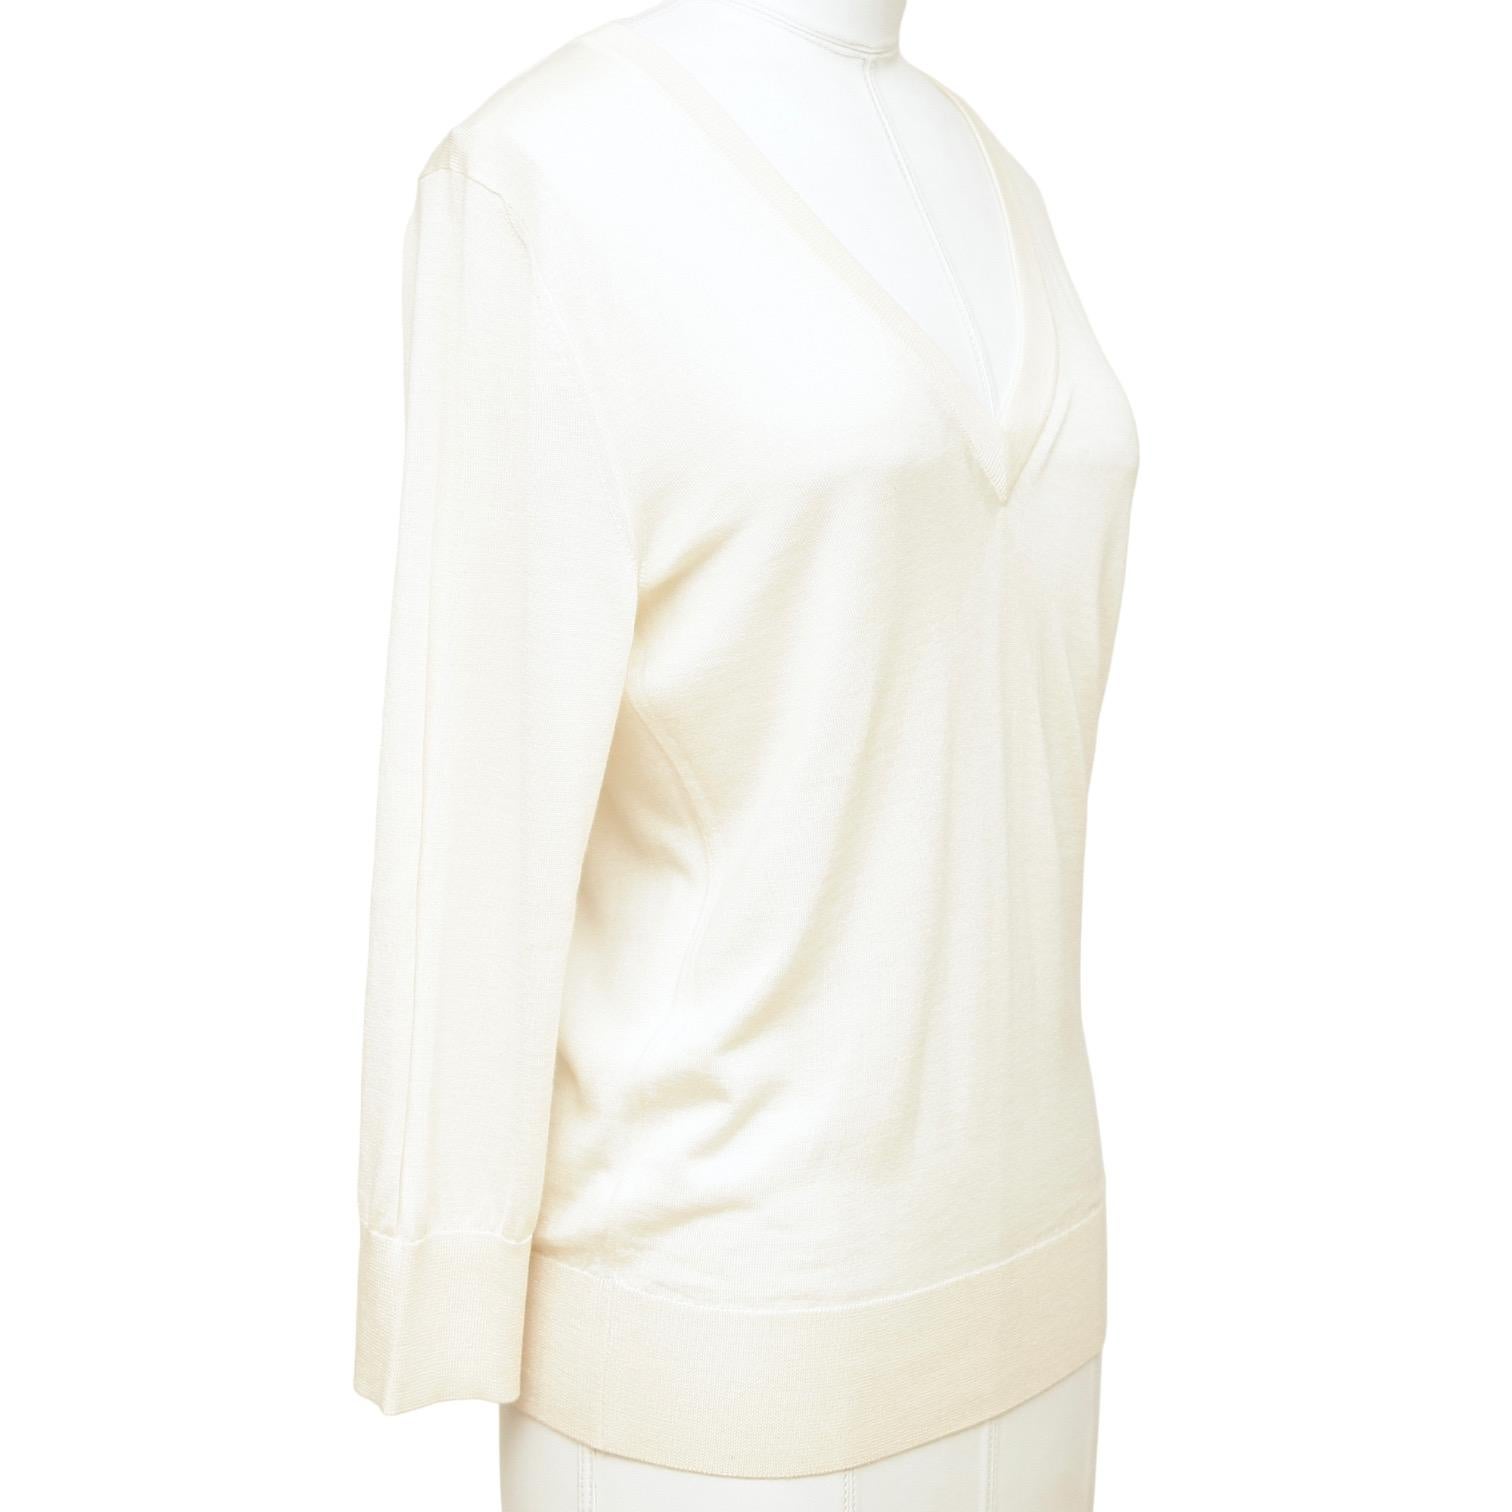 GUARANTEED AUTHENTIC DOLCE & GABBANA IVORY LONG SLEEVE SWEATER

Details:
- Ivory 3/4 sleeve knit sweater.
- V-neck.
- Ribbing at hem and around arms.
- Very soft and comfortable.
- Easy and year round piece.

Size: 42

Fabric: 70% Cashmere, 30%